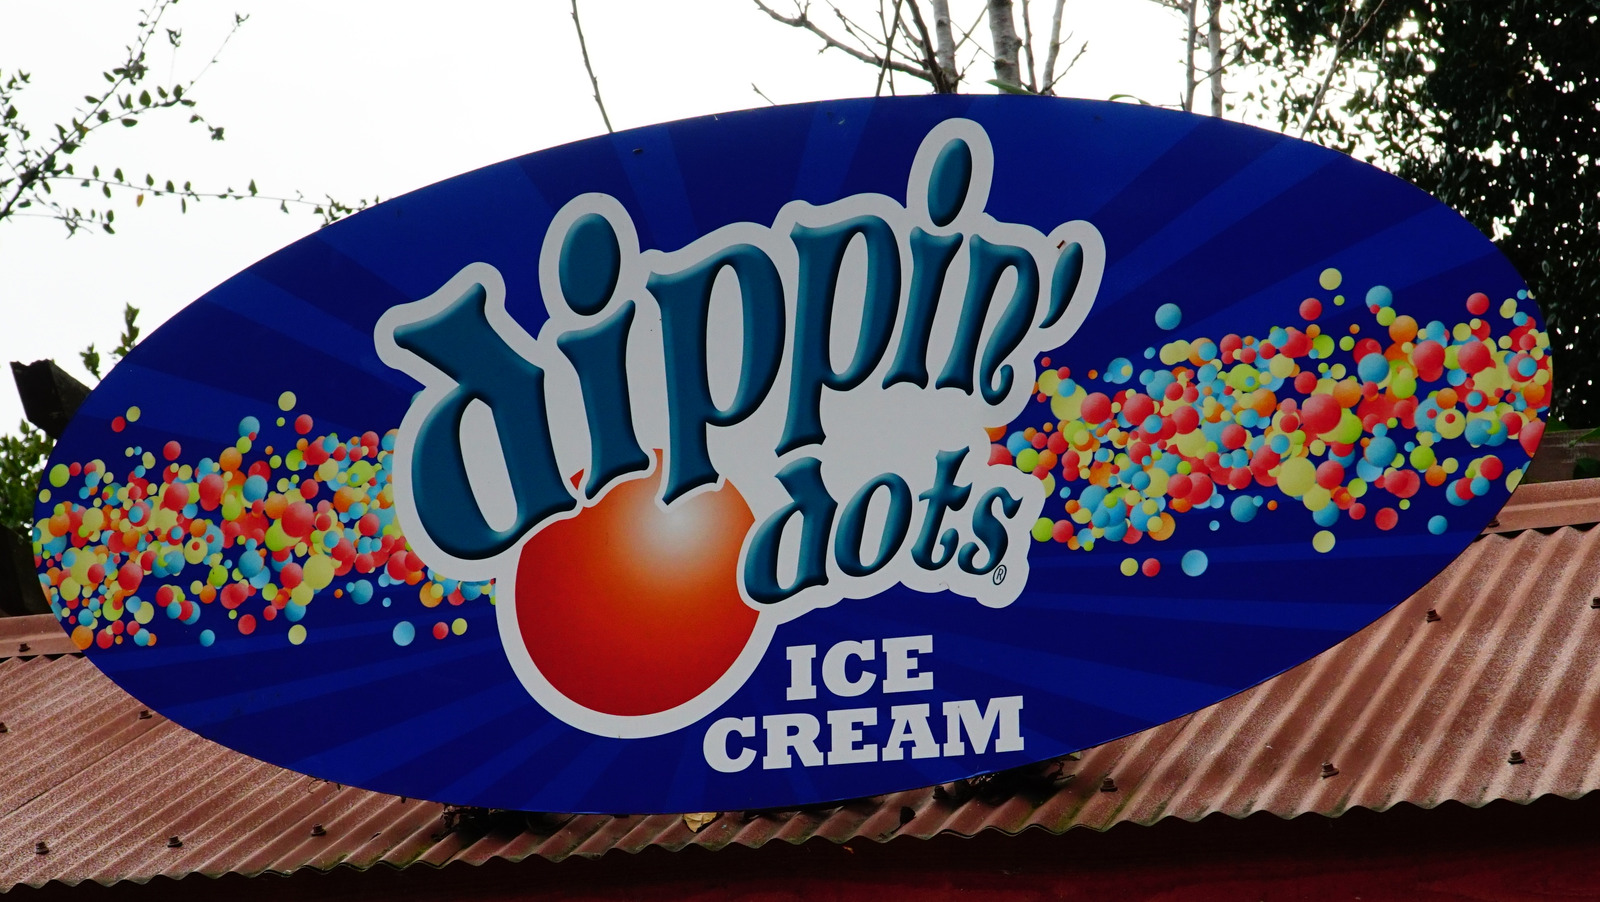 https://www.mashed.com/img/gallery/why-dippin-dots-nearly-went-bankrupt/l-intro-1629836618.jpg